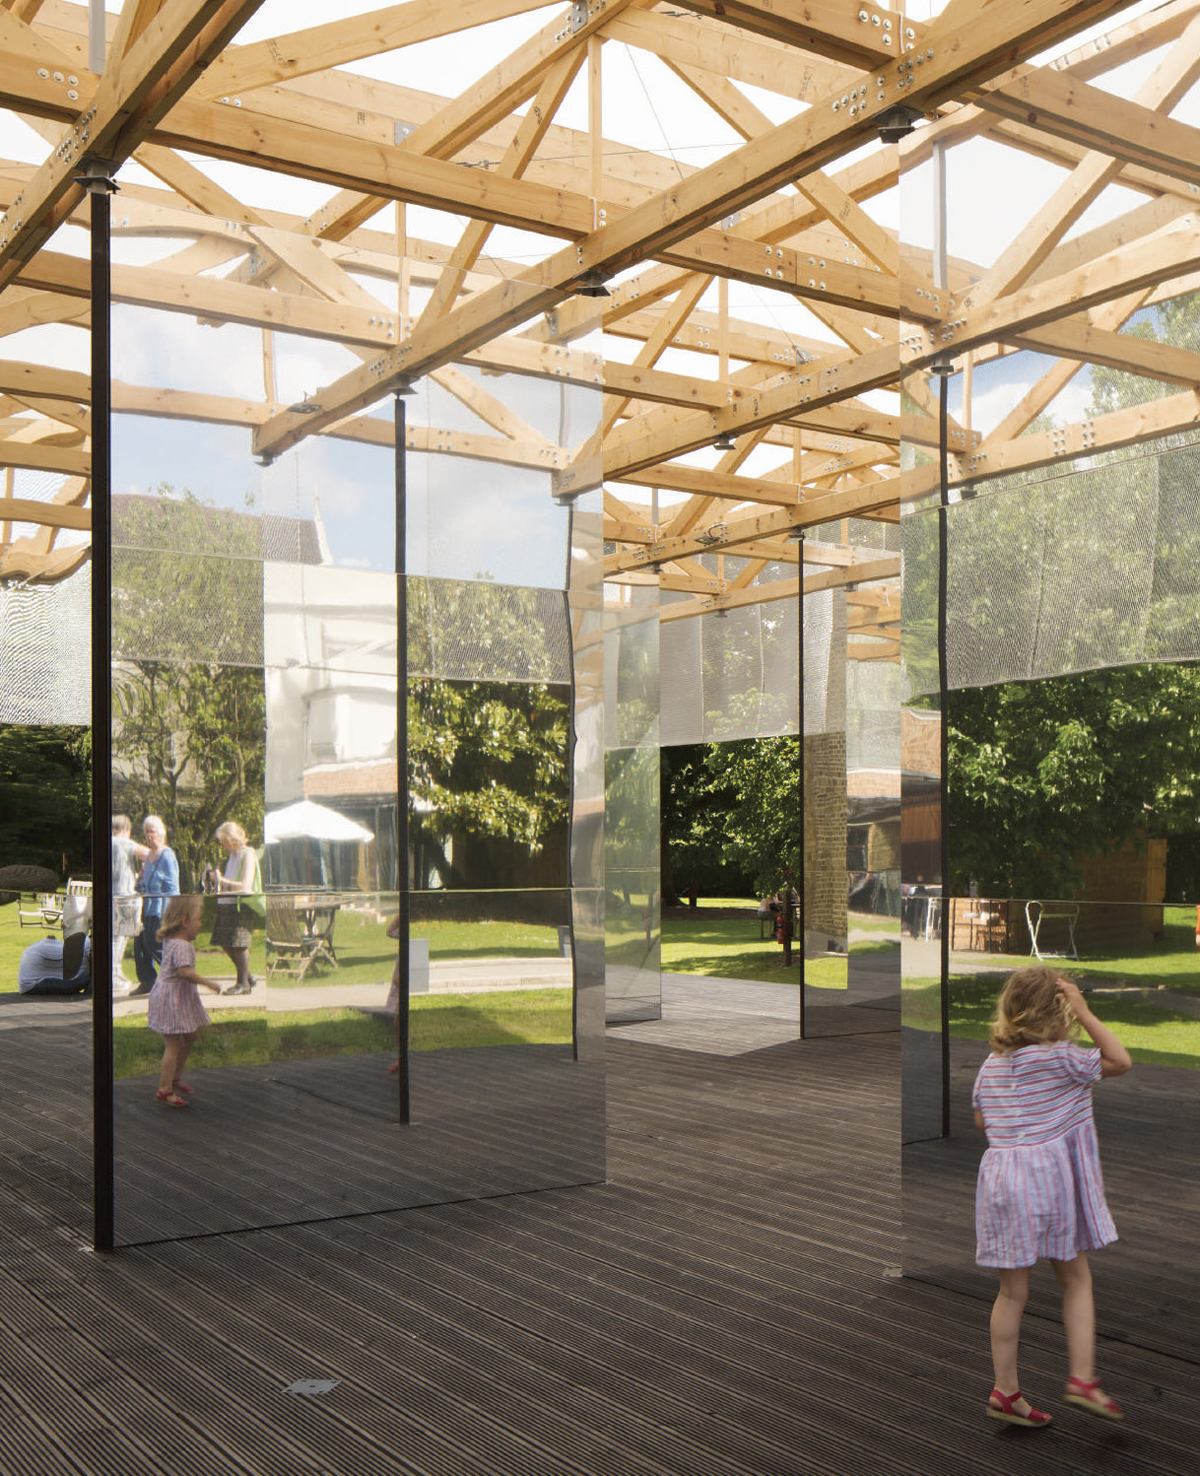 lightweight timber roof pavilion competition winner dulwich